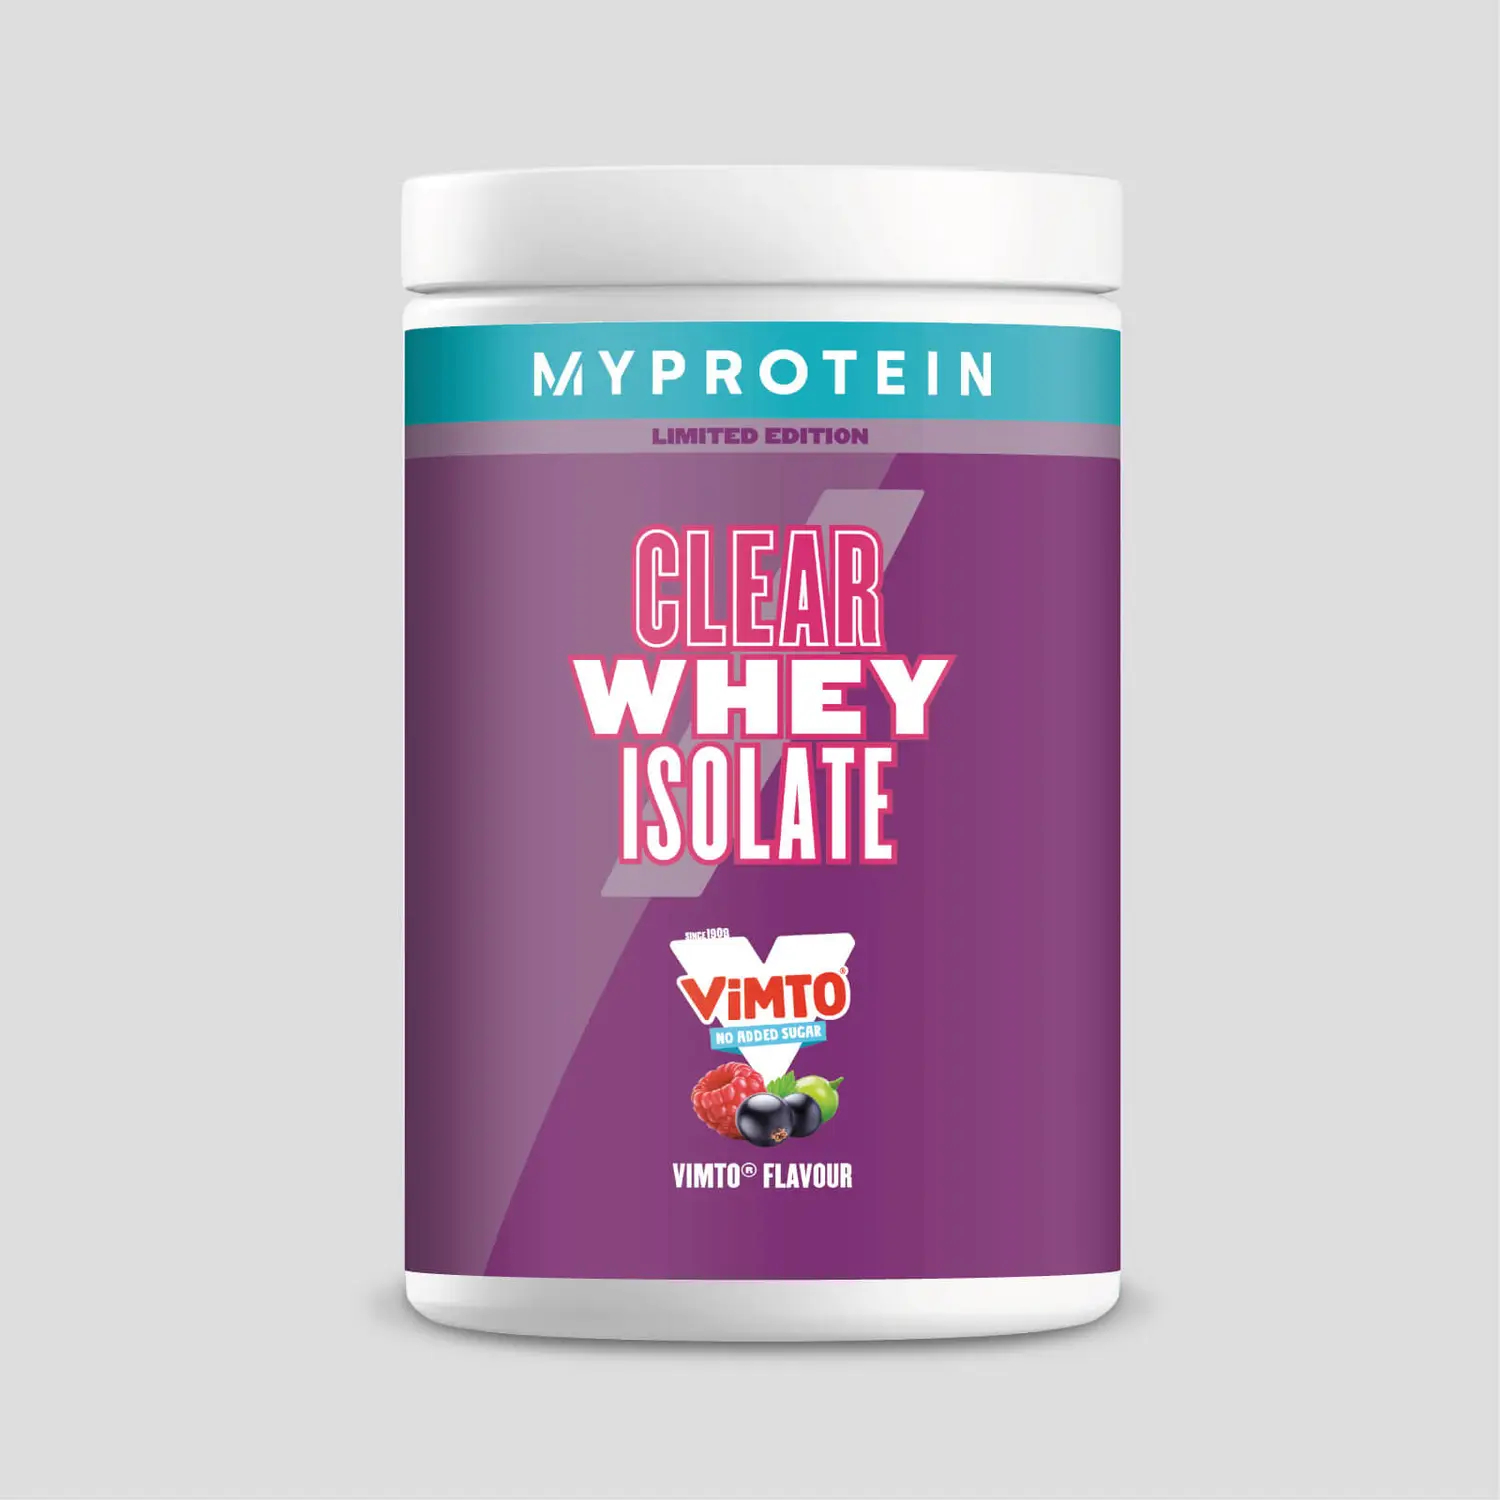 my protein clear whey isolate vimto flavour